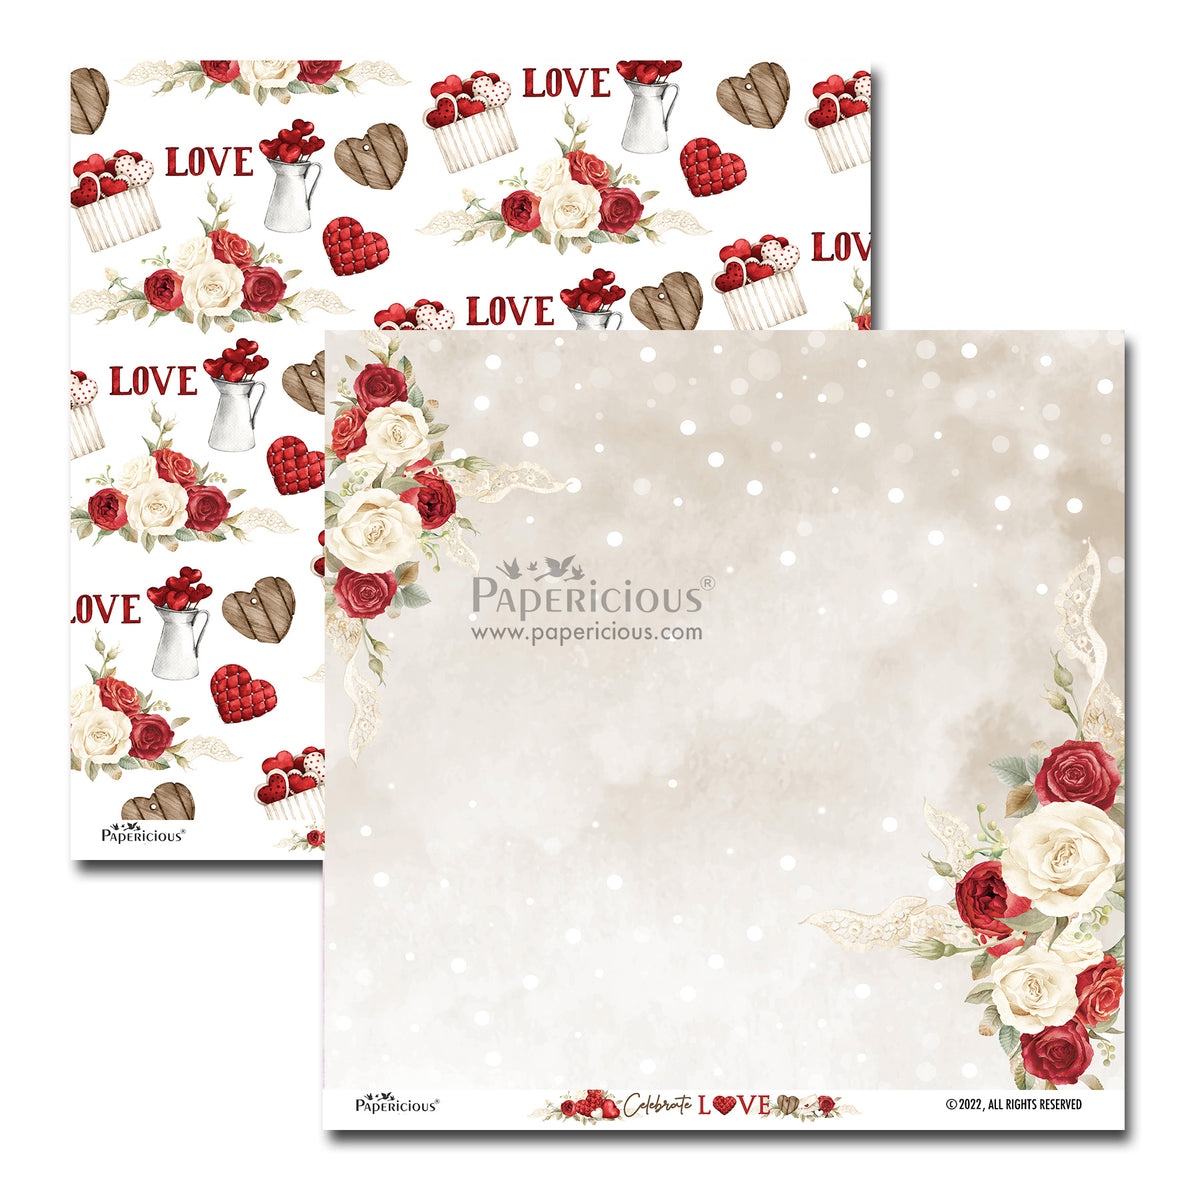 PAPERICIOUS - Celebrate Love -  Designer Pattern Printed Scrapbook Papers 12x12 inch  / 20 sheets